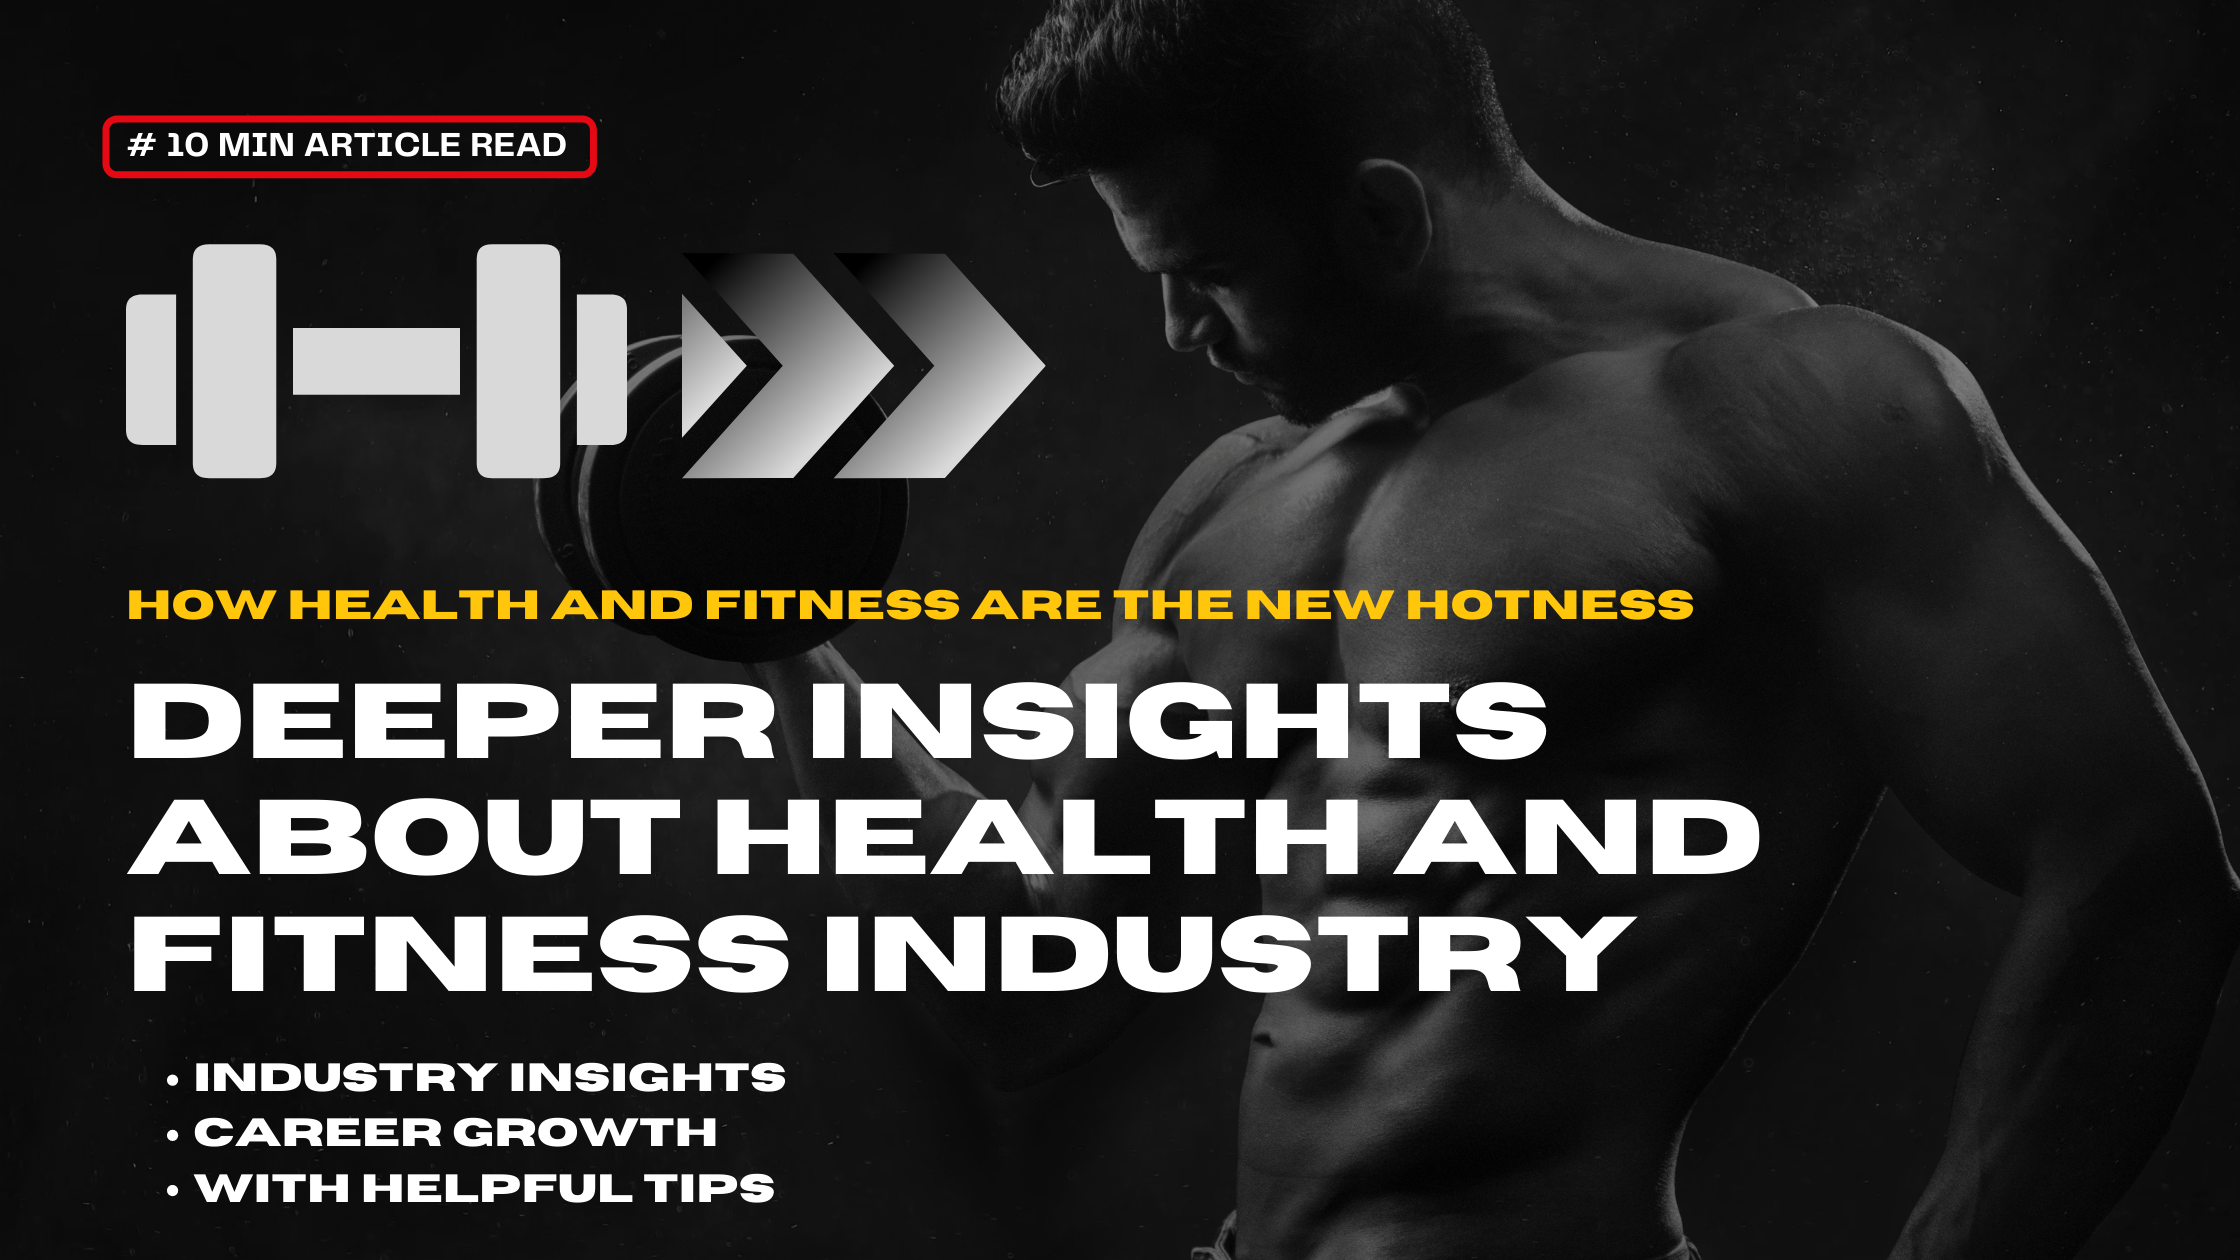 Health and Fitness Industry Insights